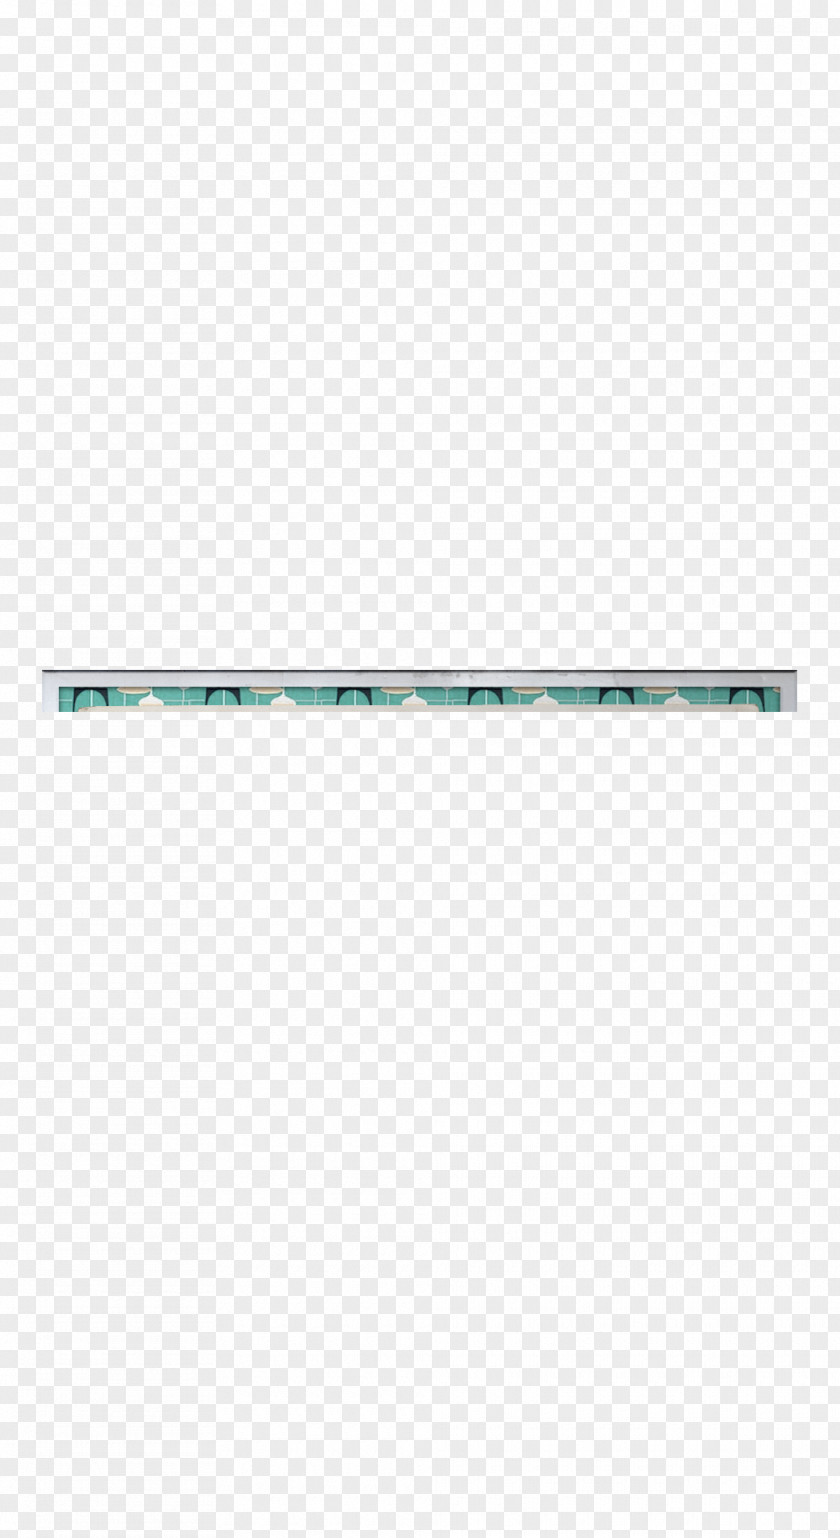 Scars Teal Turquoise Rectangle Line PNG